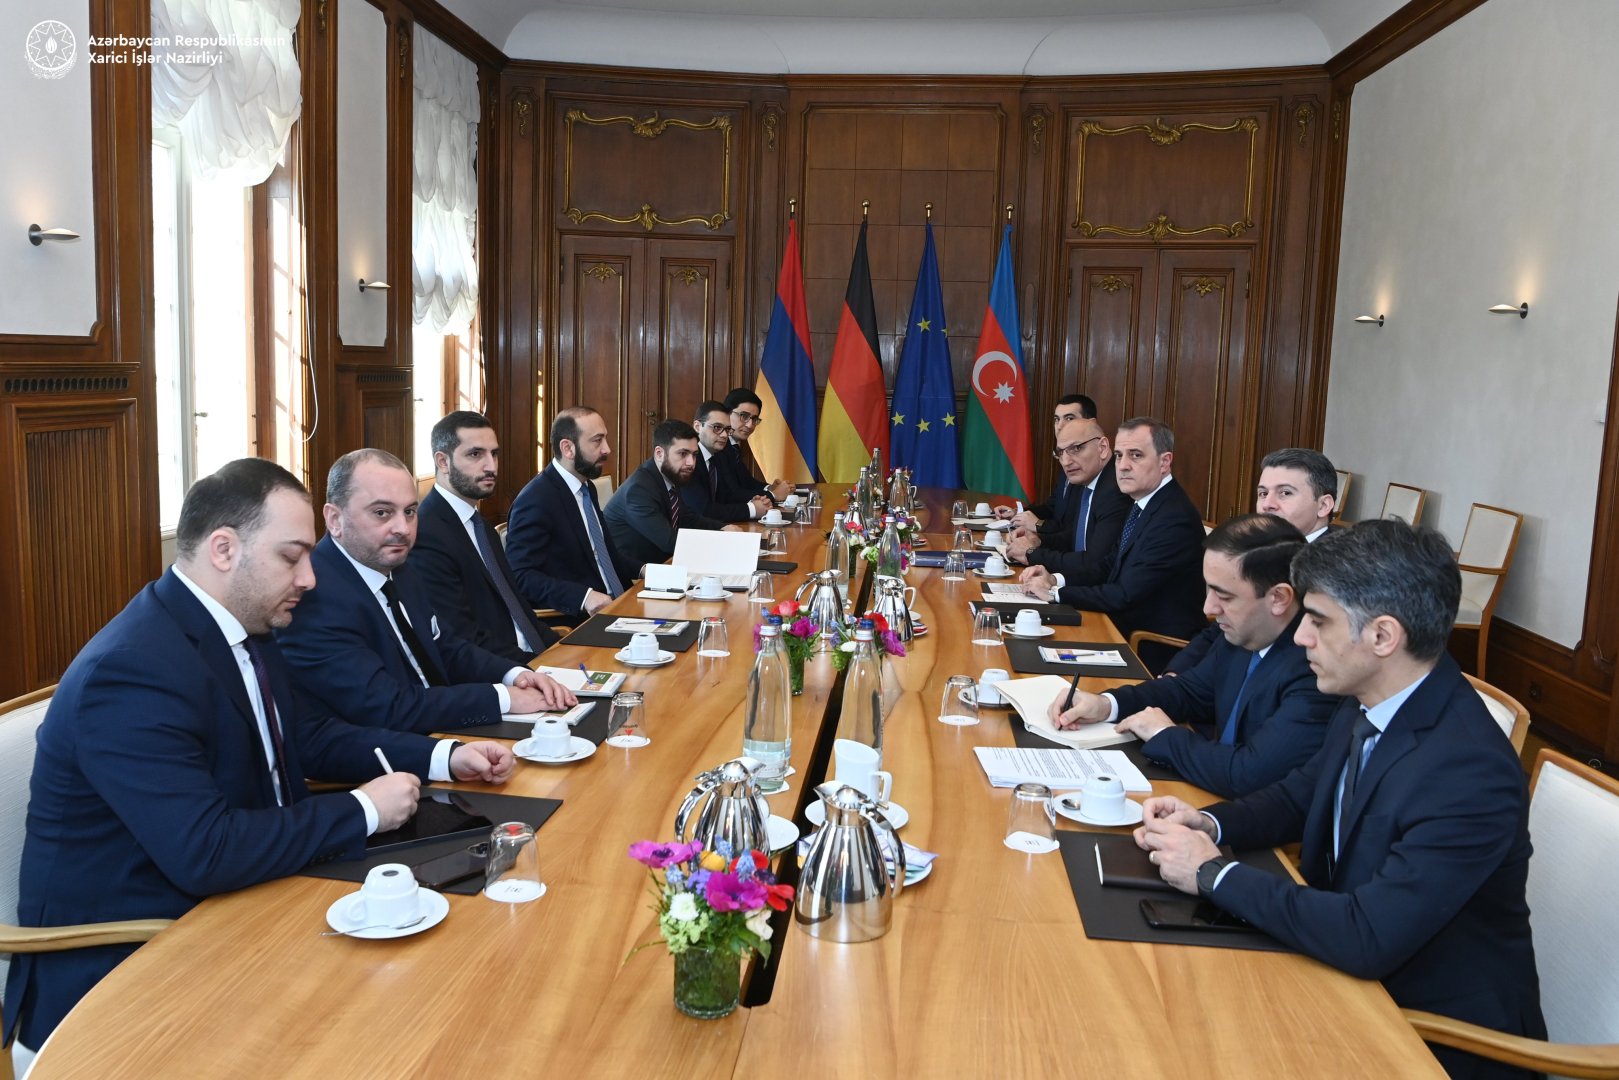 Foreign Ministers of Azerebaijan and Armenia meet for second day in row